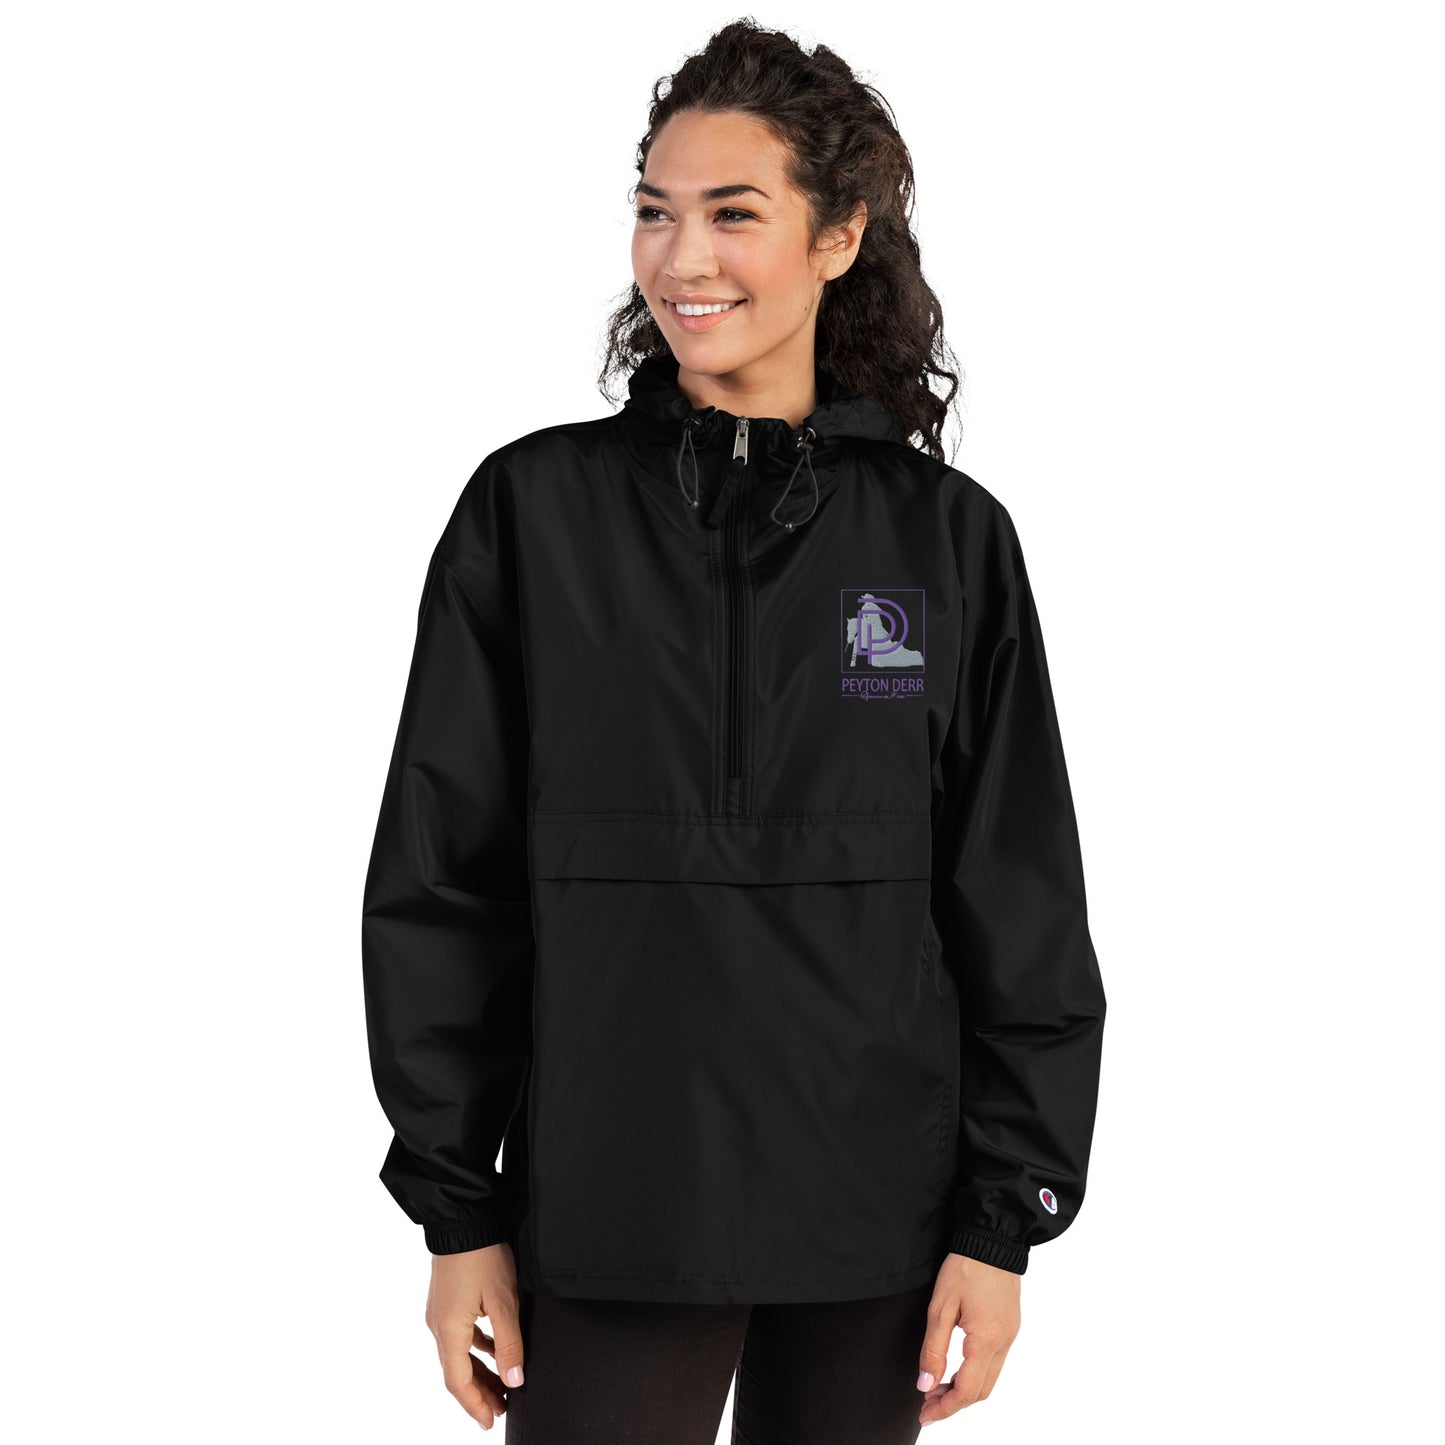 Embroidered Champion Packable Jacket - Peyton Derr Performance Horses